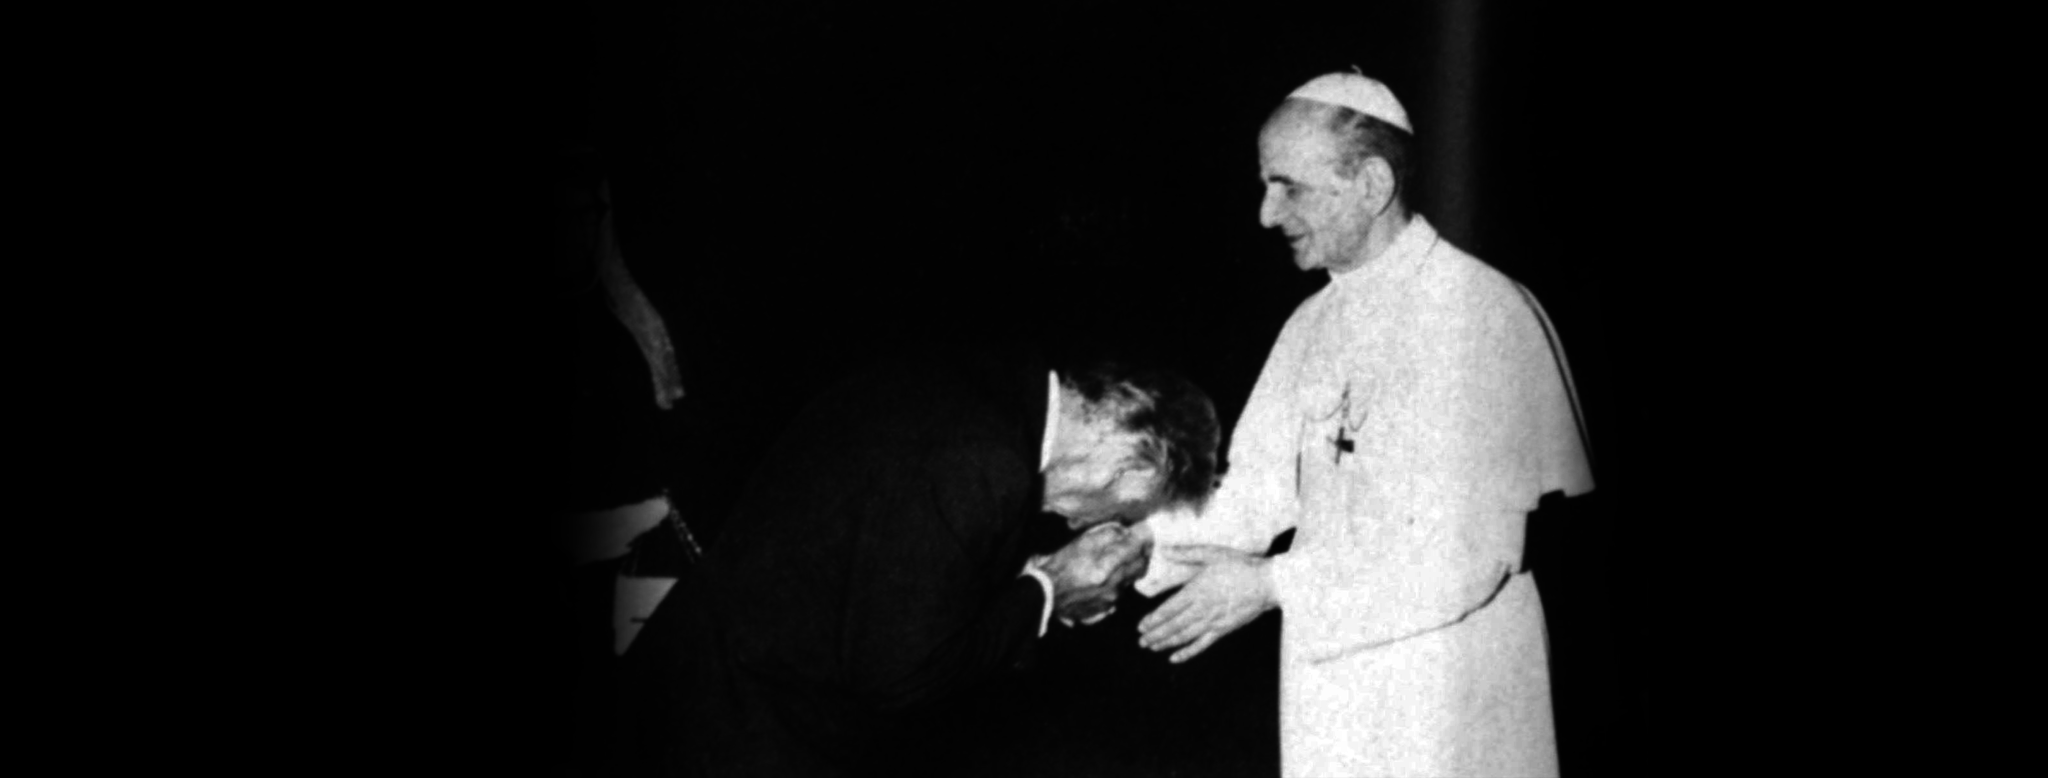 Leonard Bernstein conducted his Chichester Psalms at the Vatican for Pope Paul VI in celebration of the tenth anniversary of his elevation to the Papacy. June 23, 1973. (Courtesy of The Leonard Bernstein Office, Inc.)